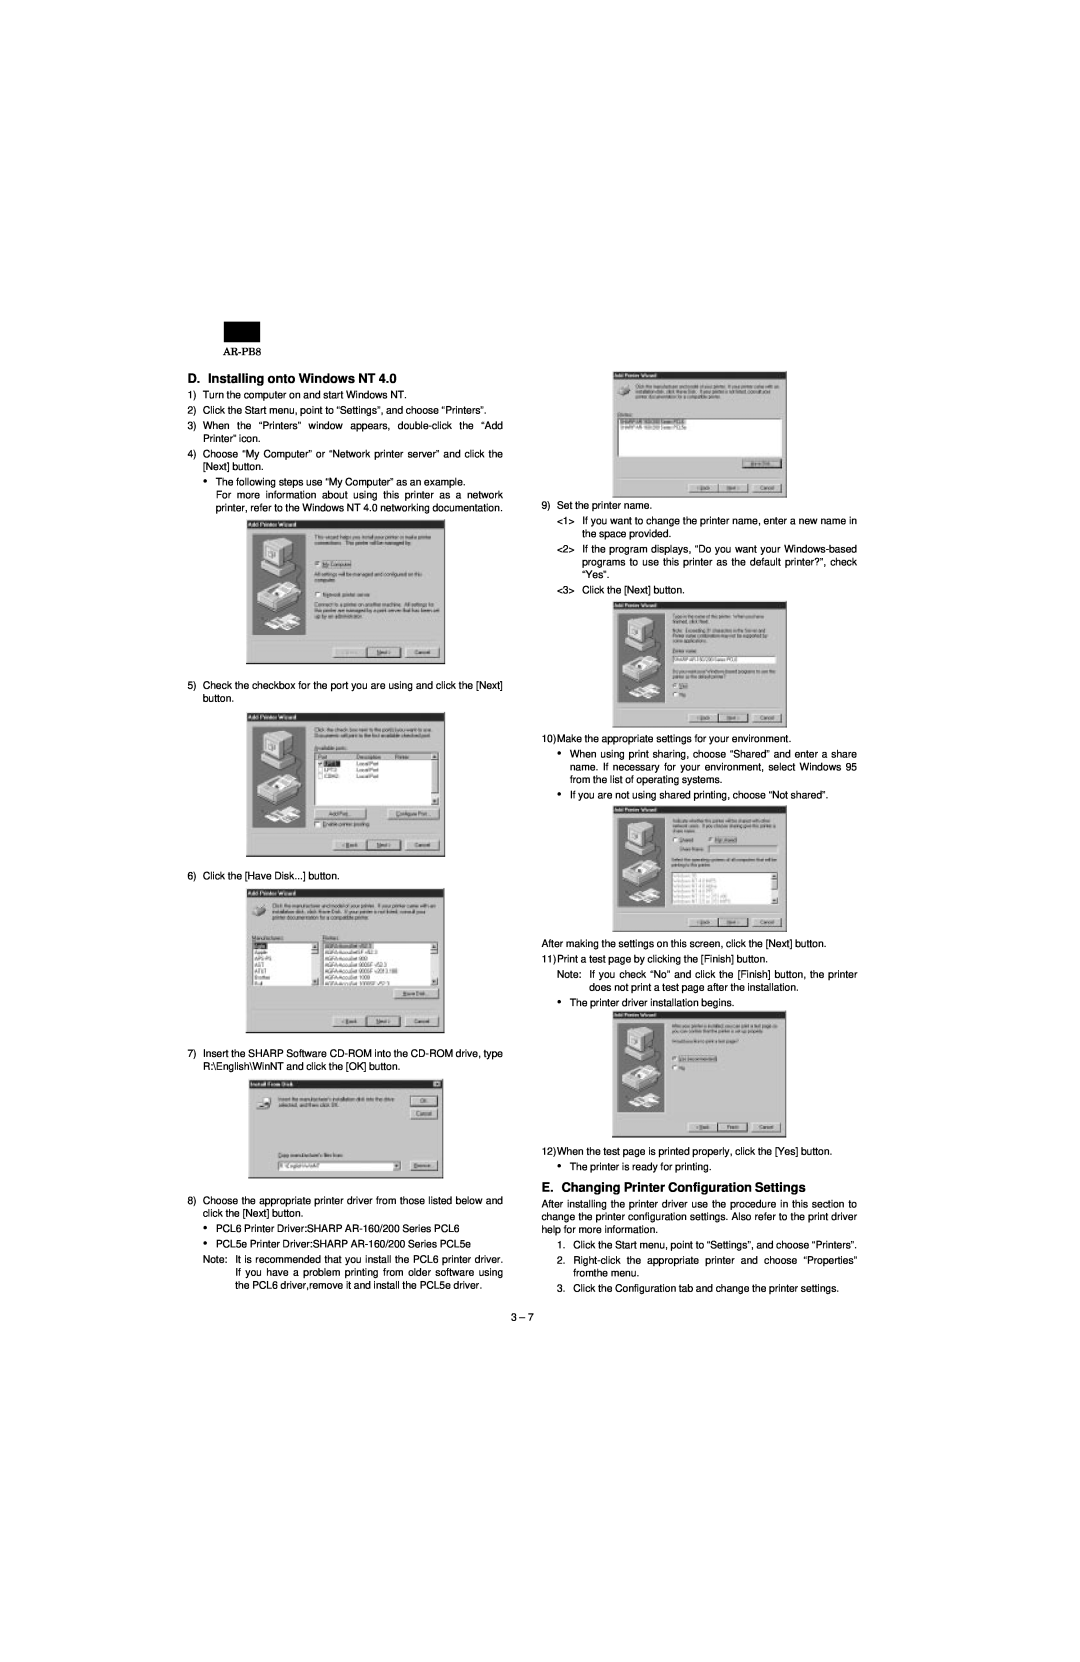 Sharp AR-PB8 specifications D. Installing onto Windows NT, E.Changing Printer Configuration Settings 